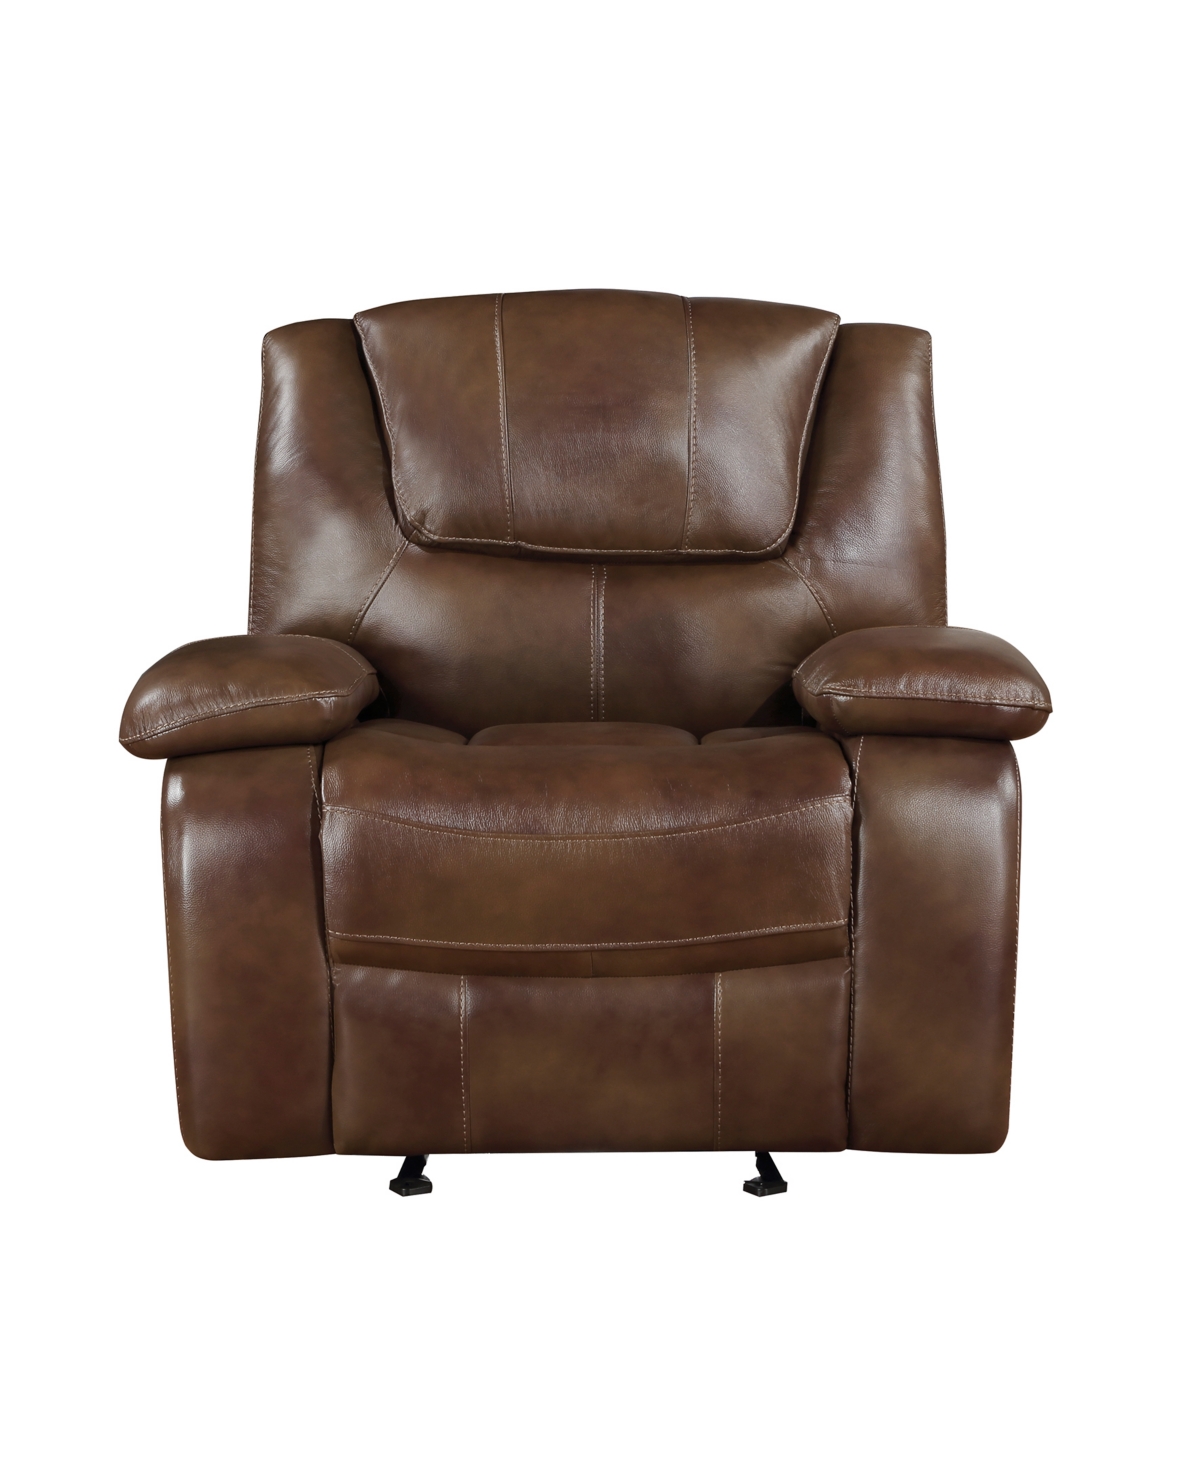 Homelegance White Label Ouray 40" Leather Glider Reclining Chair In Brown